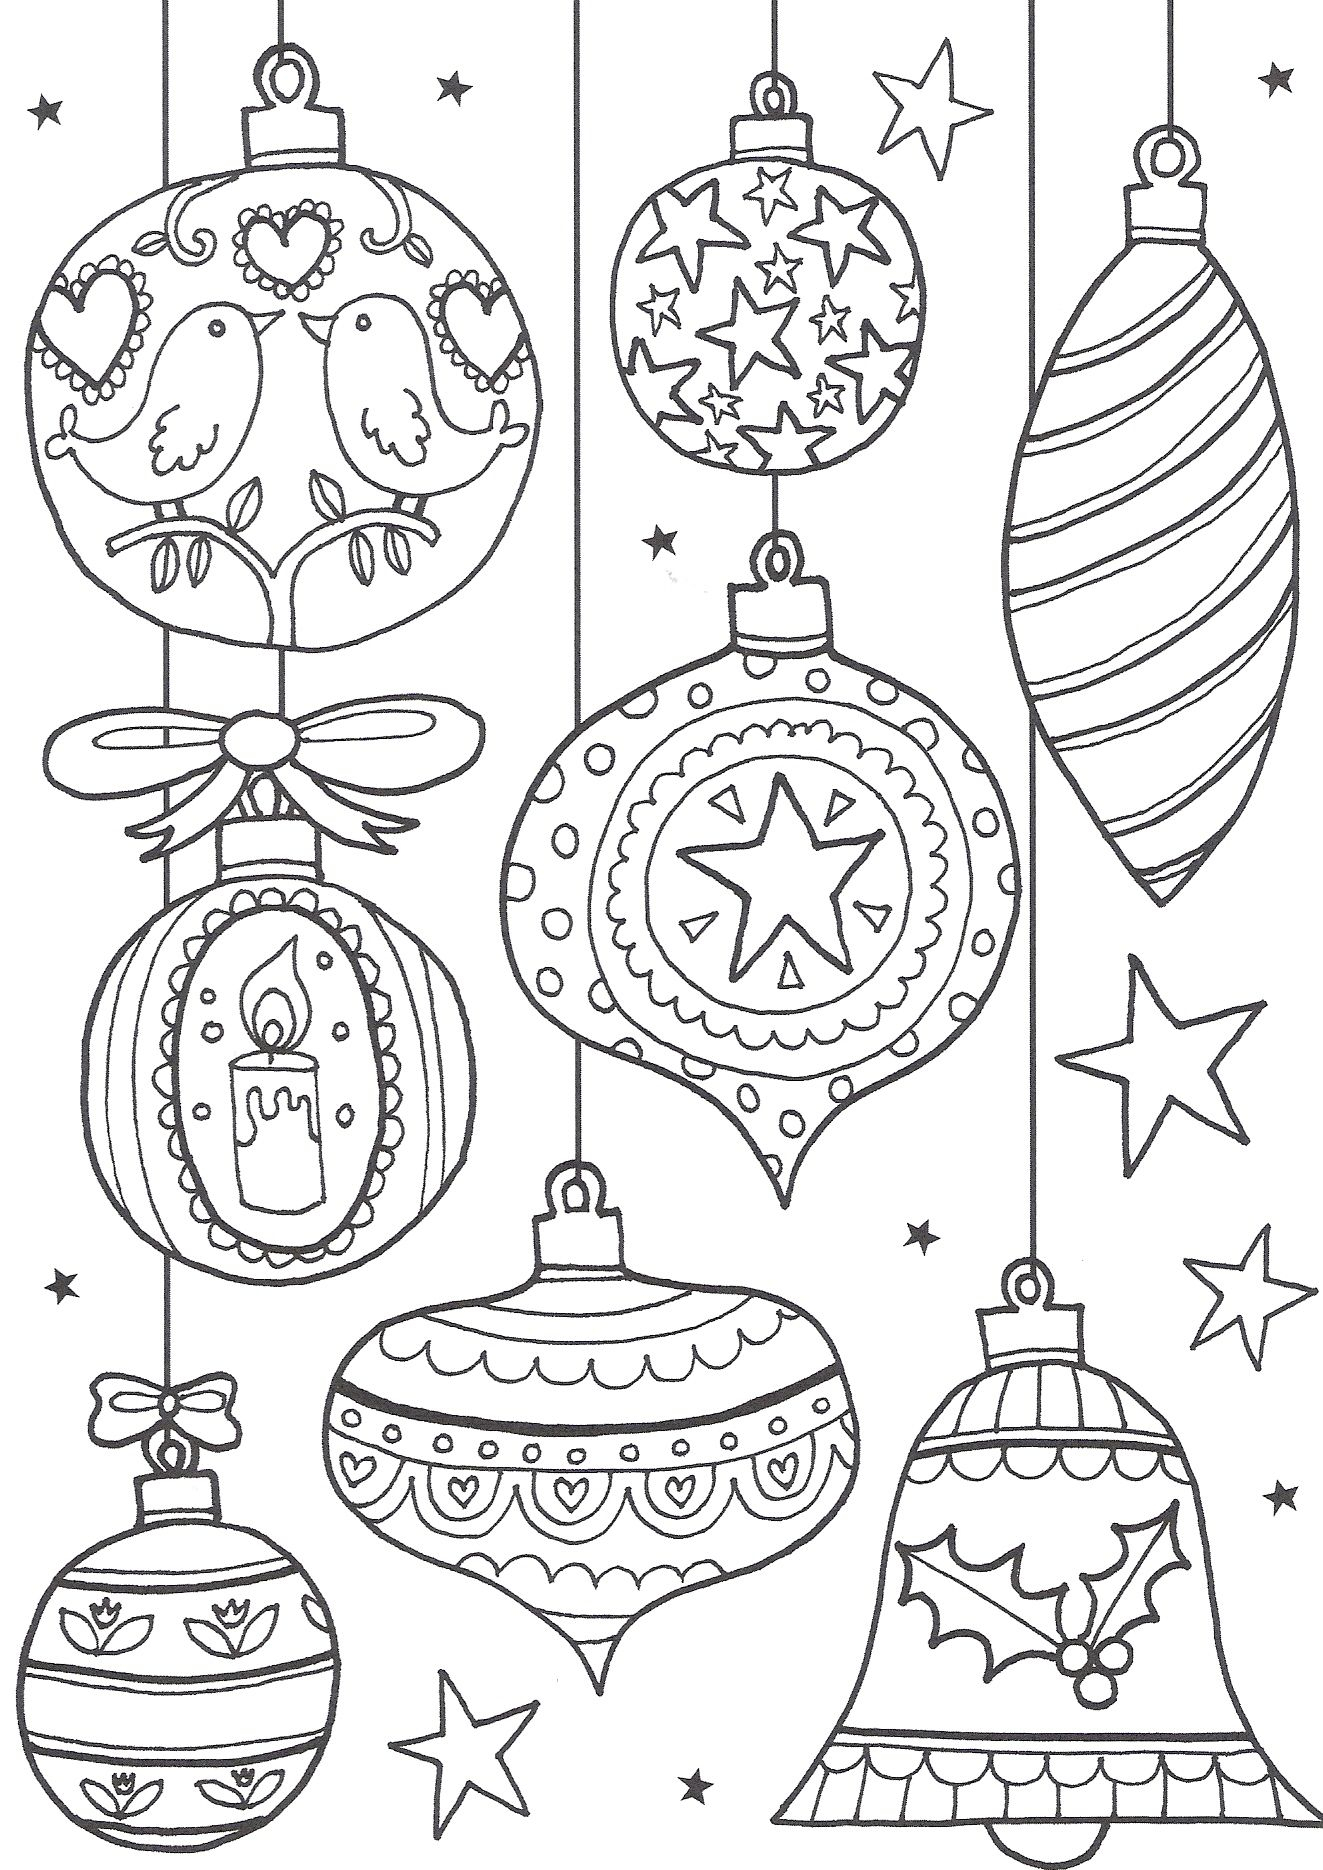 Free Christmas Colouring Pages For Adults – The Ultimate Roundup - Free Printable Christmas Coloring Pages